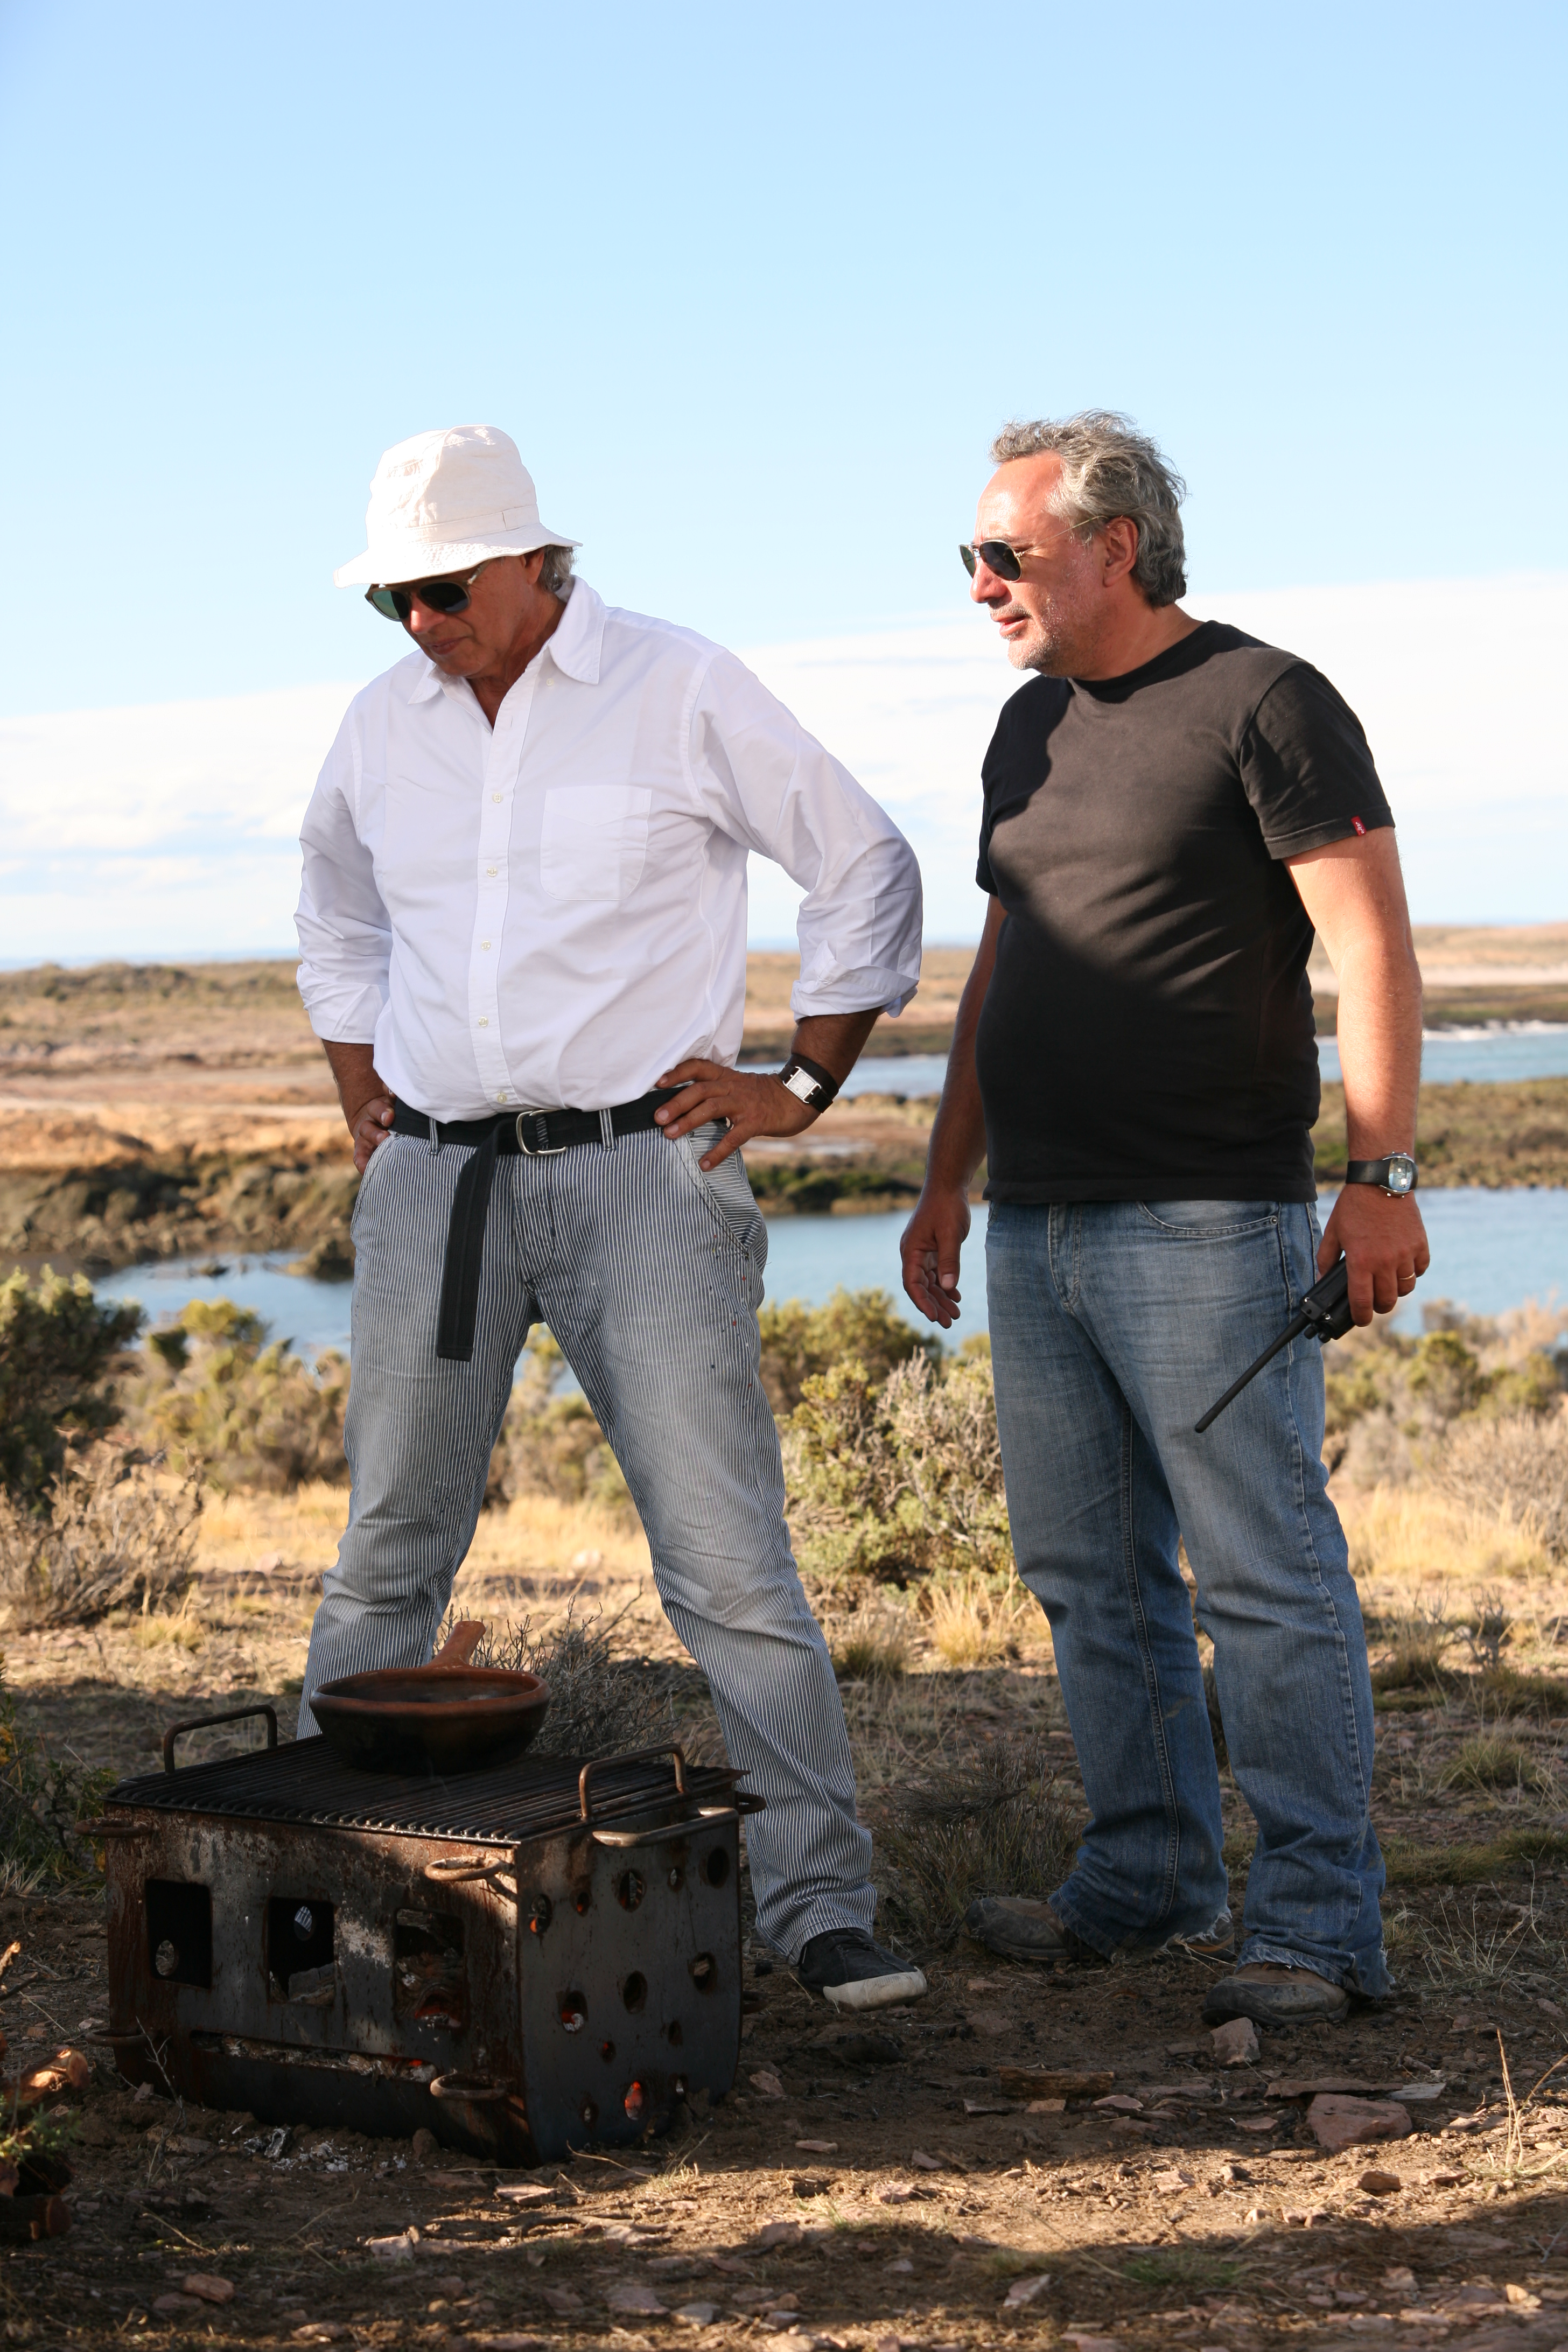 With Chef/Host Francis Mallmann, on location in Chubut, Argentina, during 